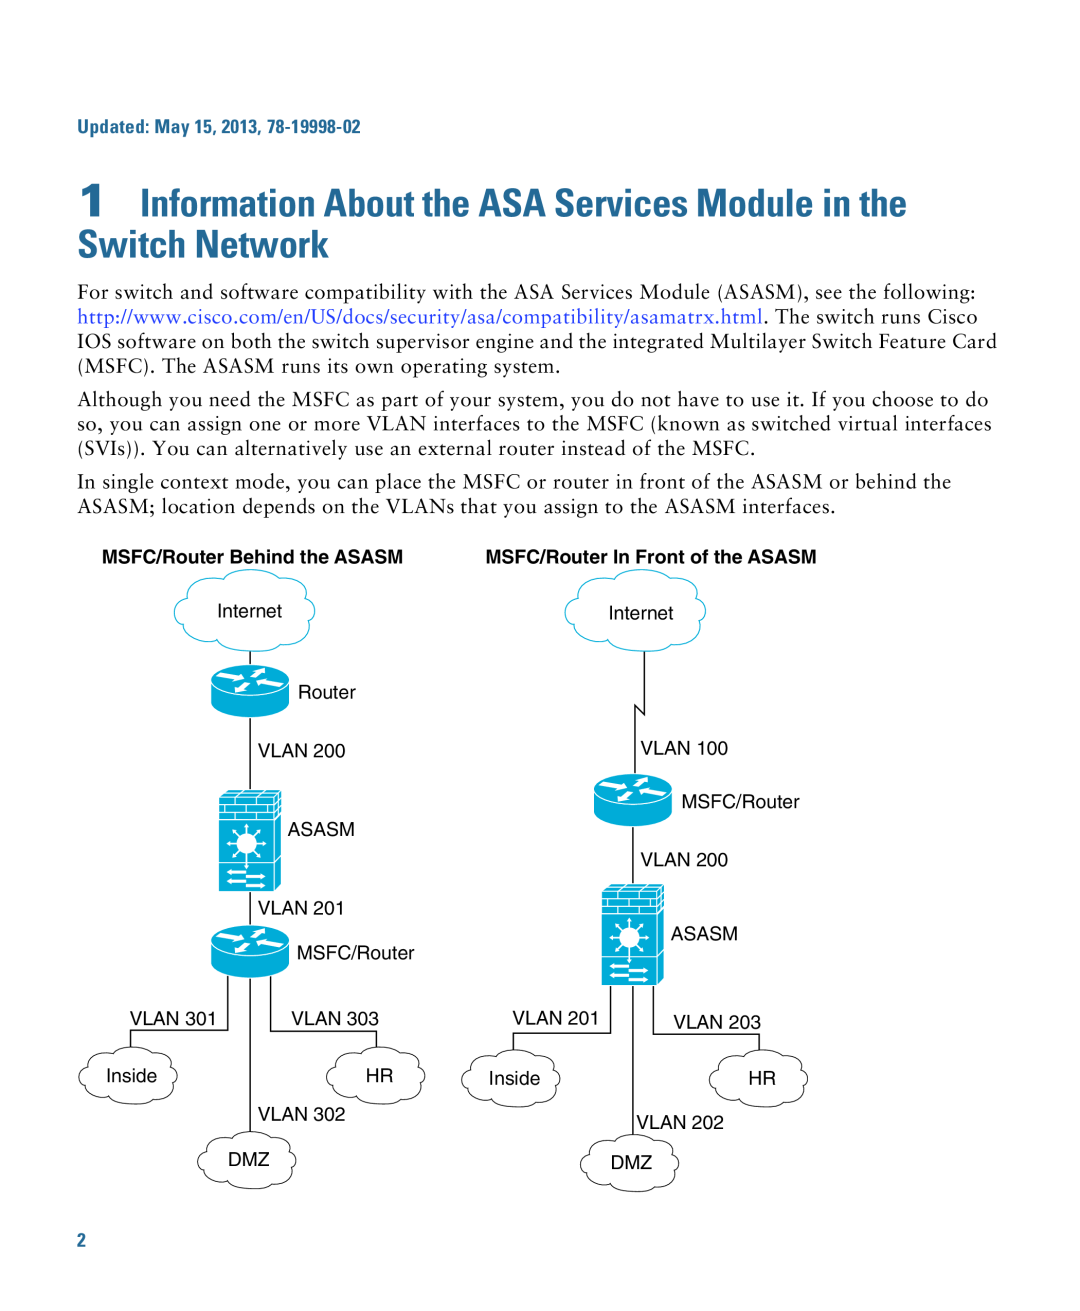 Cisco Systems ASASSMCSC10K9 Information About the ASA Services Module in the Switch Network, Updated May 15, 2013 